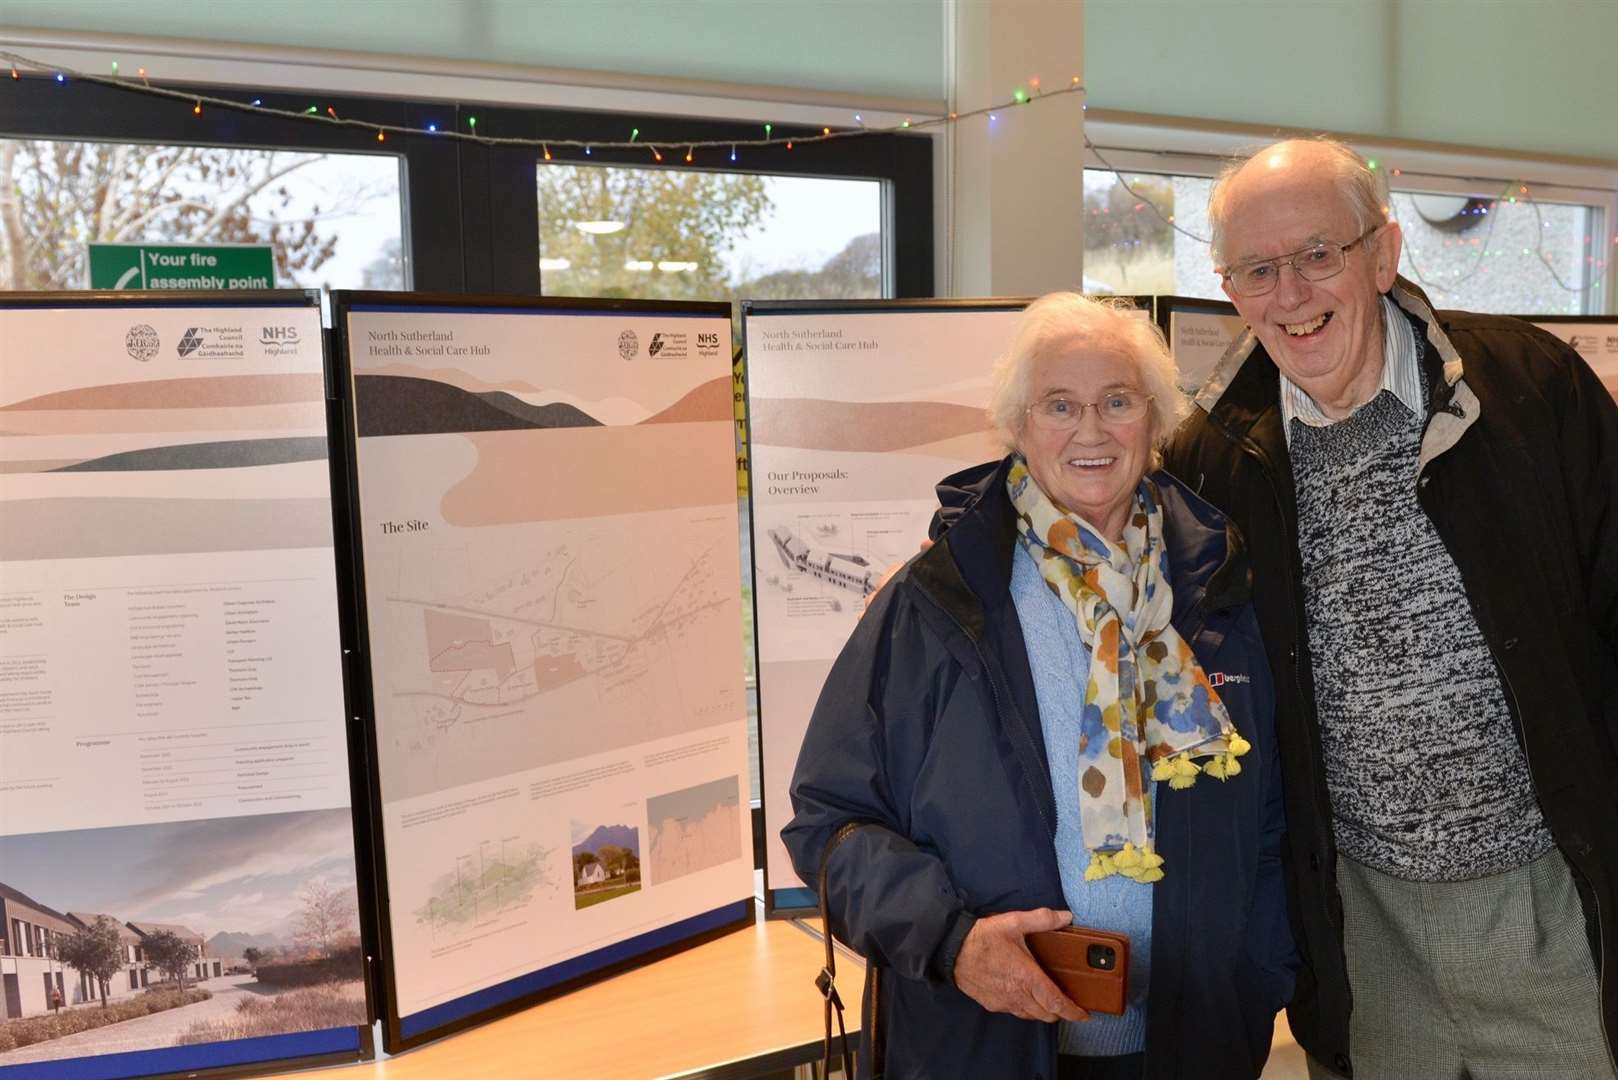 Among the first people to attend the drop-in session last Wednesday were this Tain couple who have a special interest in ground source heat pumps. Picture: Jim A. Johnston